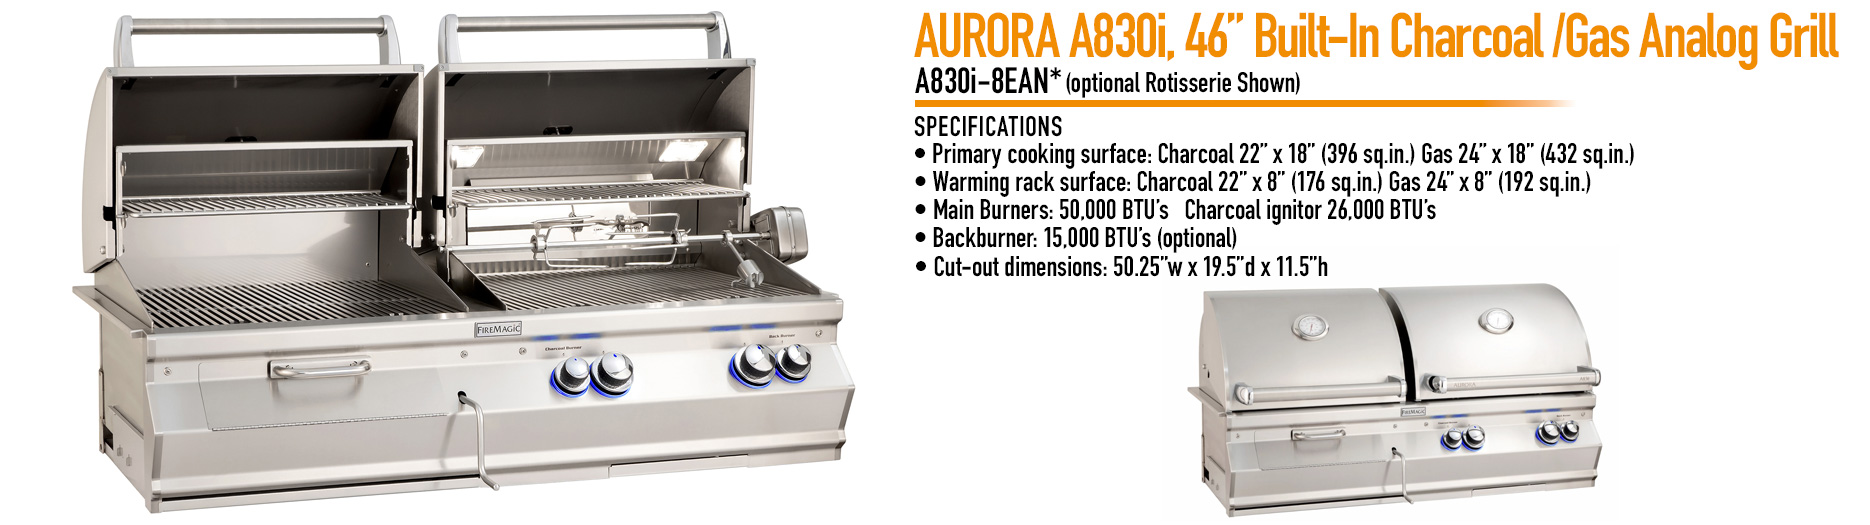 Fire Magic Aurora A830 Combo Gas/Charcoal Built-In Grill (Optional Rotisserie)